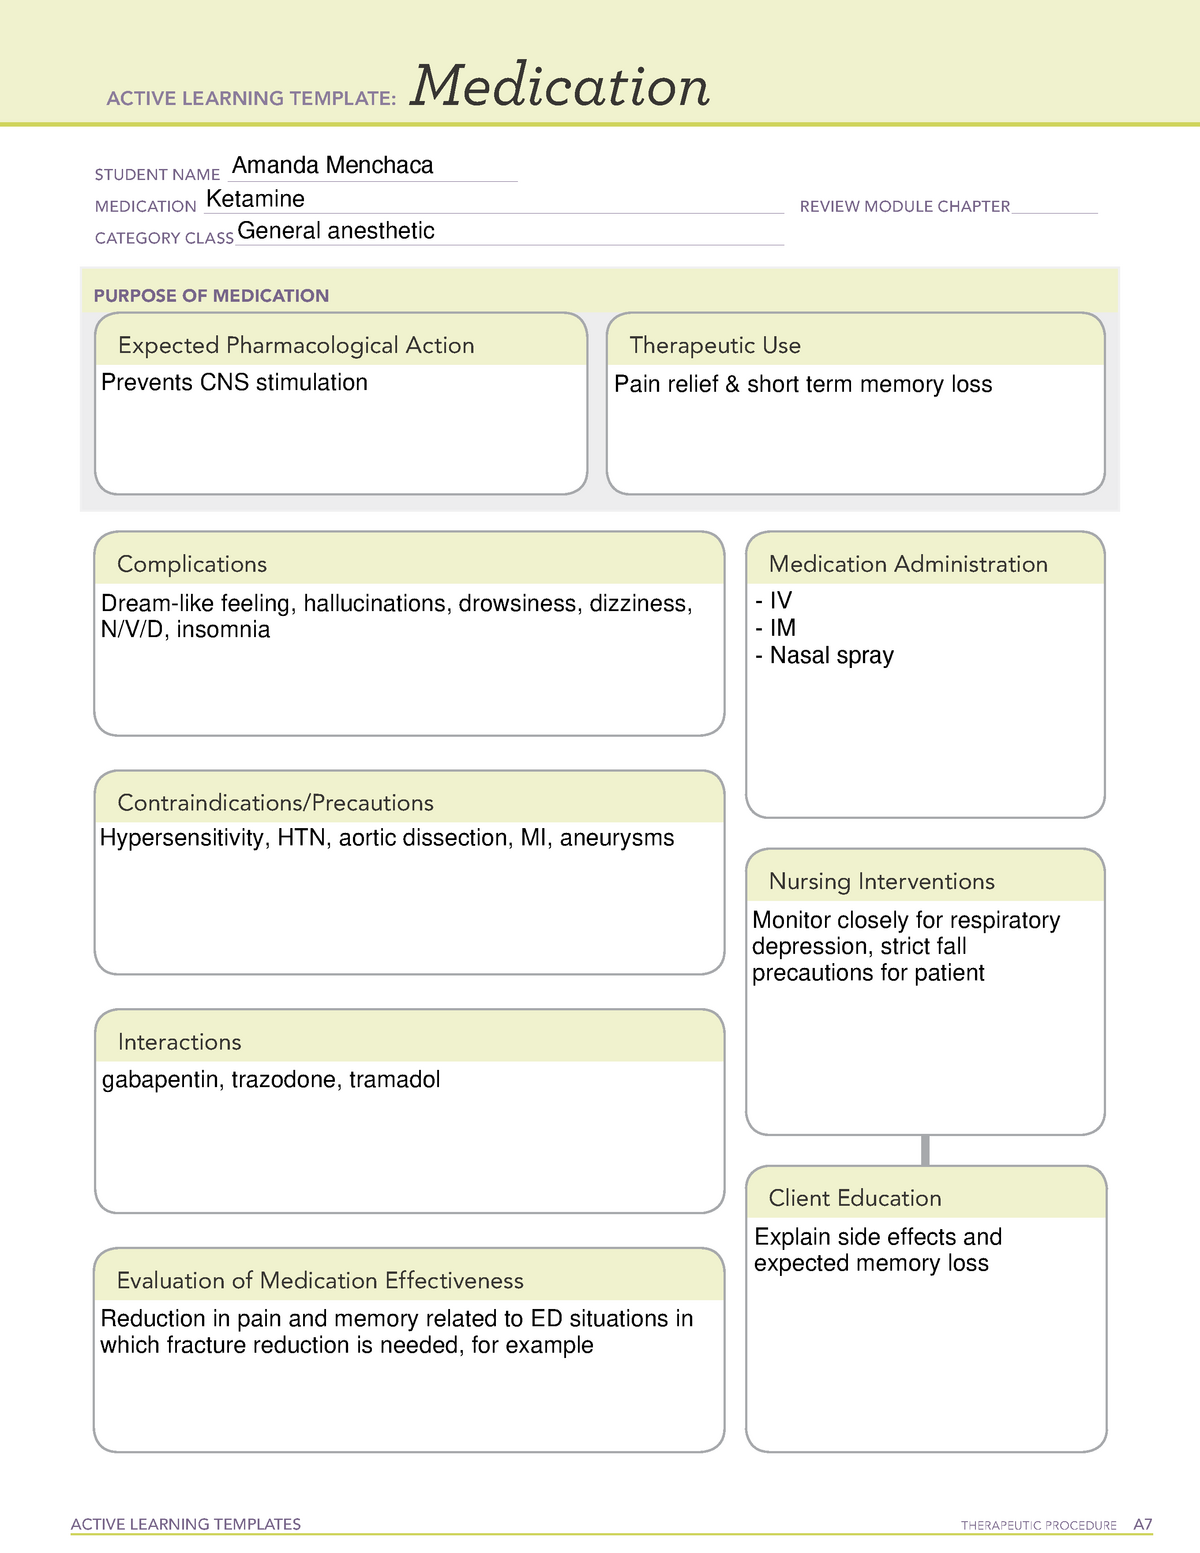 KetamineMED ACTIVE LEARNING TEMPLATES THERAPEUTIC PROCEDURE A